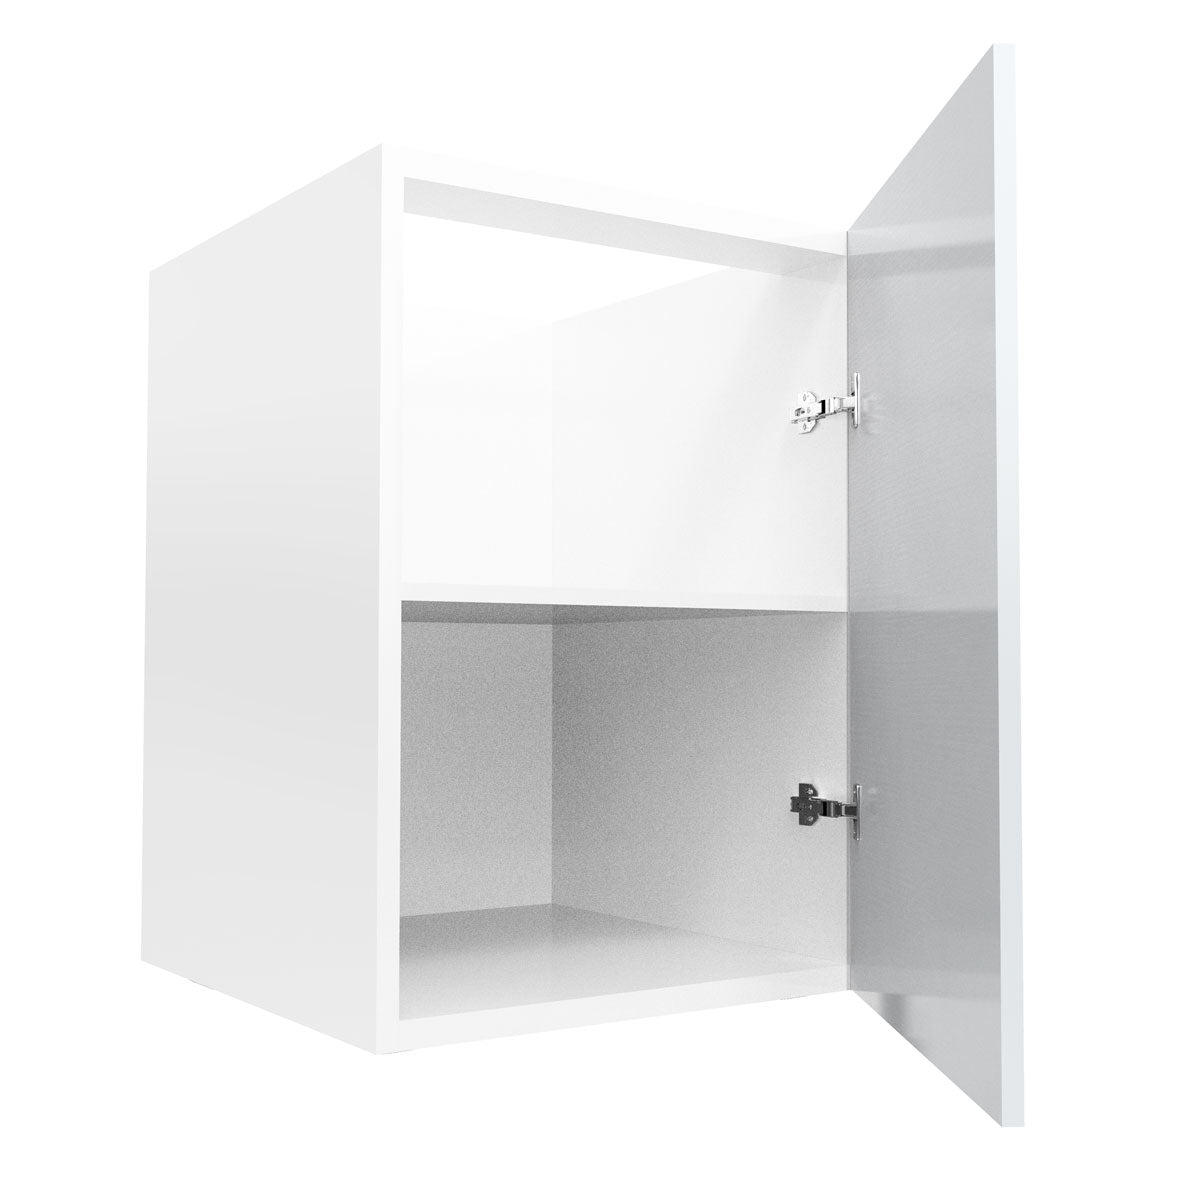 RTA - Glossy White - Full Height Single Door Base Cabinets | 21"W x 30"H x 23.8"D